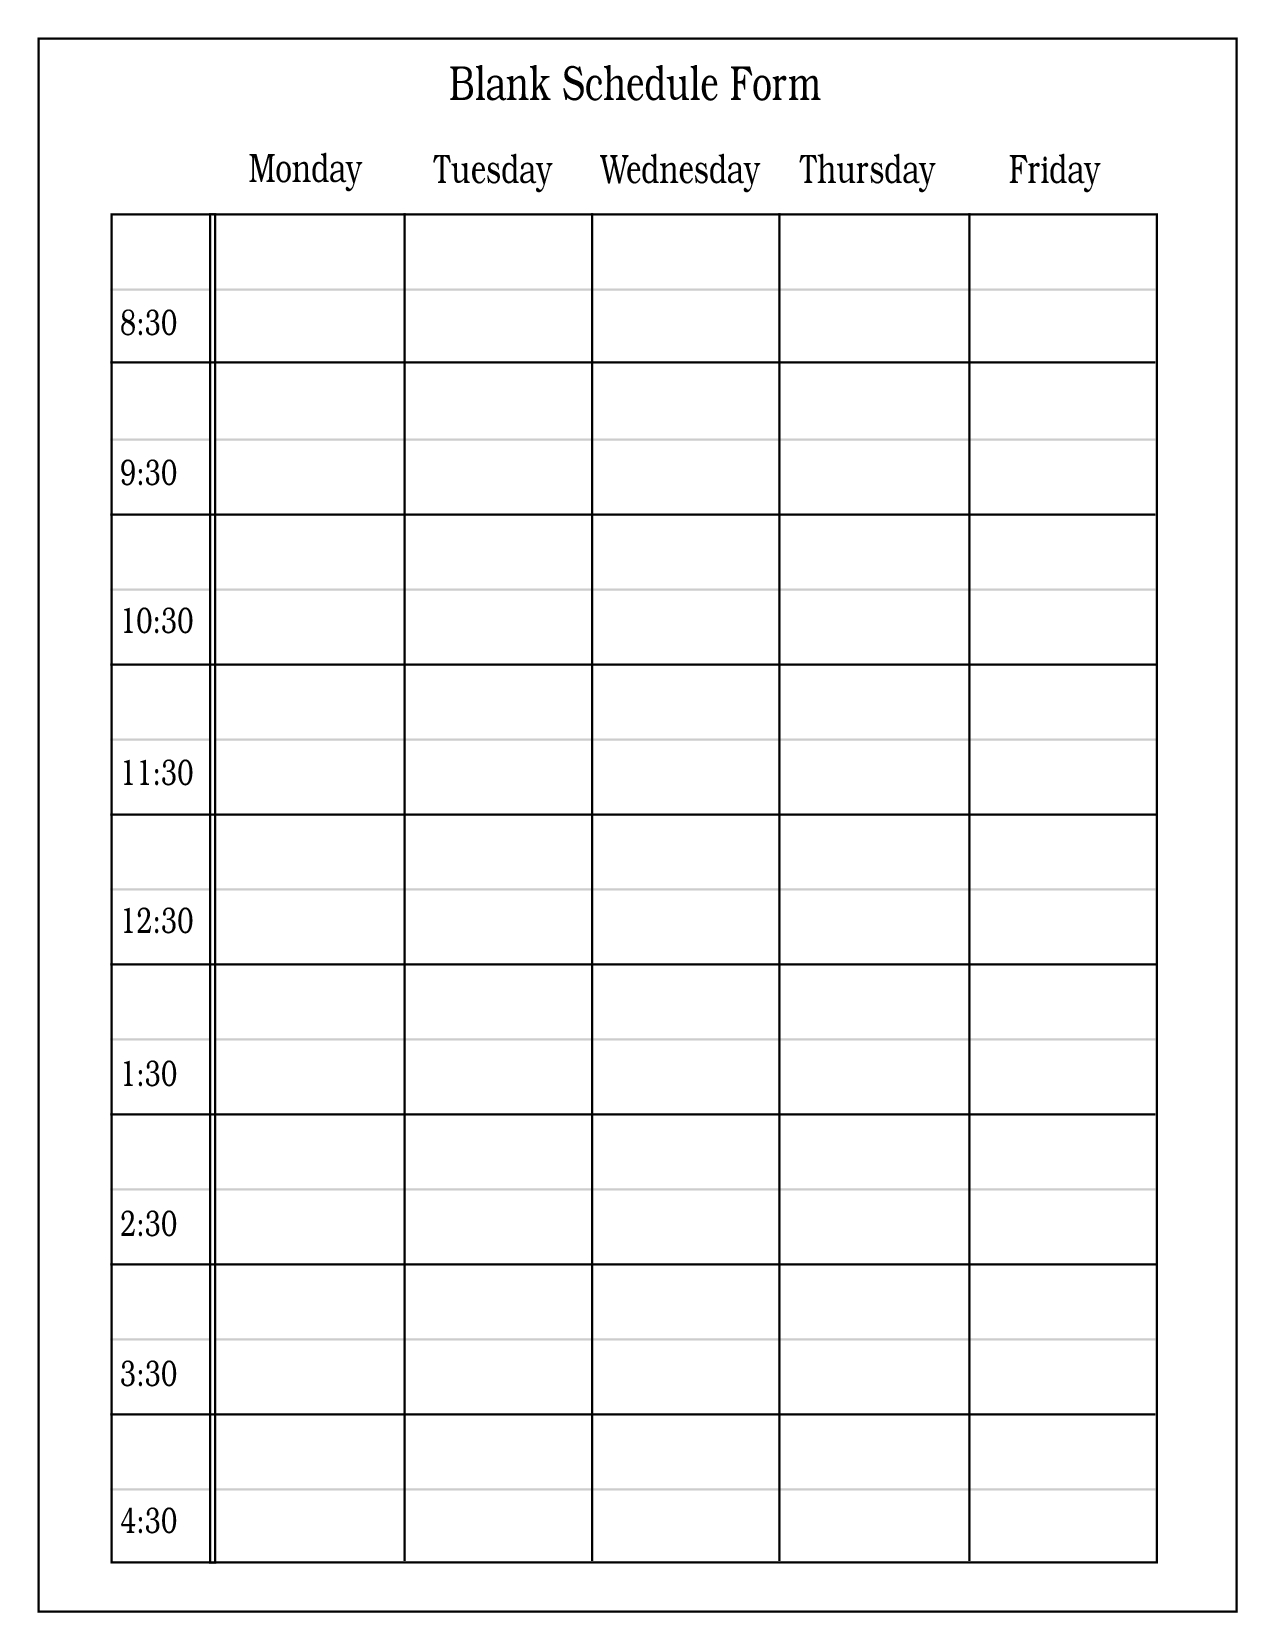 Employee Scheduling - Download A Free Employee Schedule Template For intended for Blank 12 Hour Shift Schedule Templates